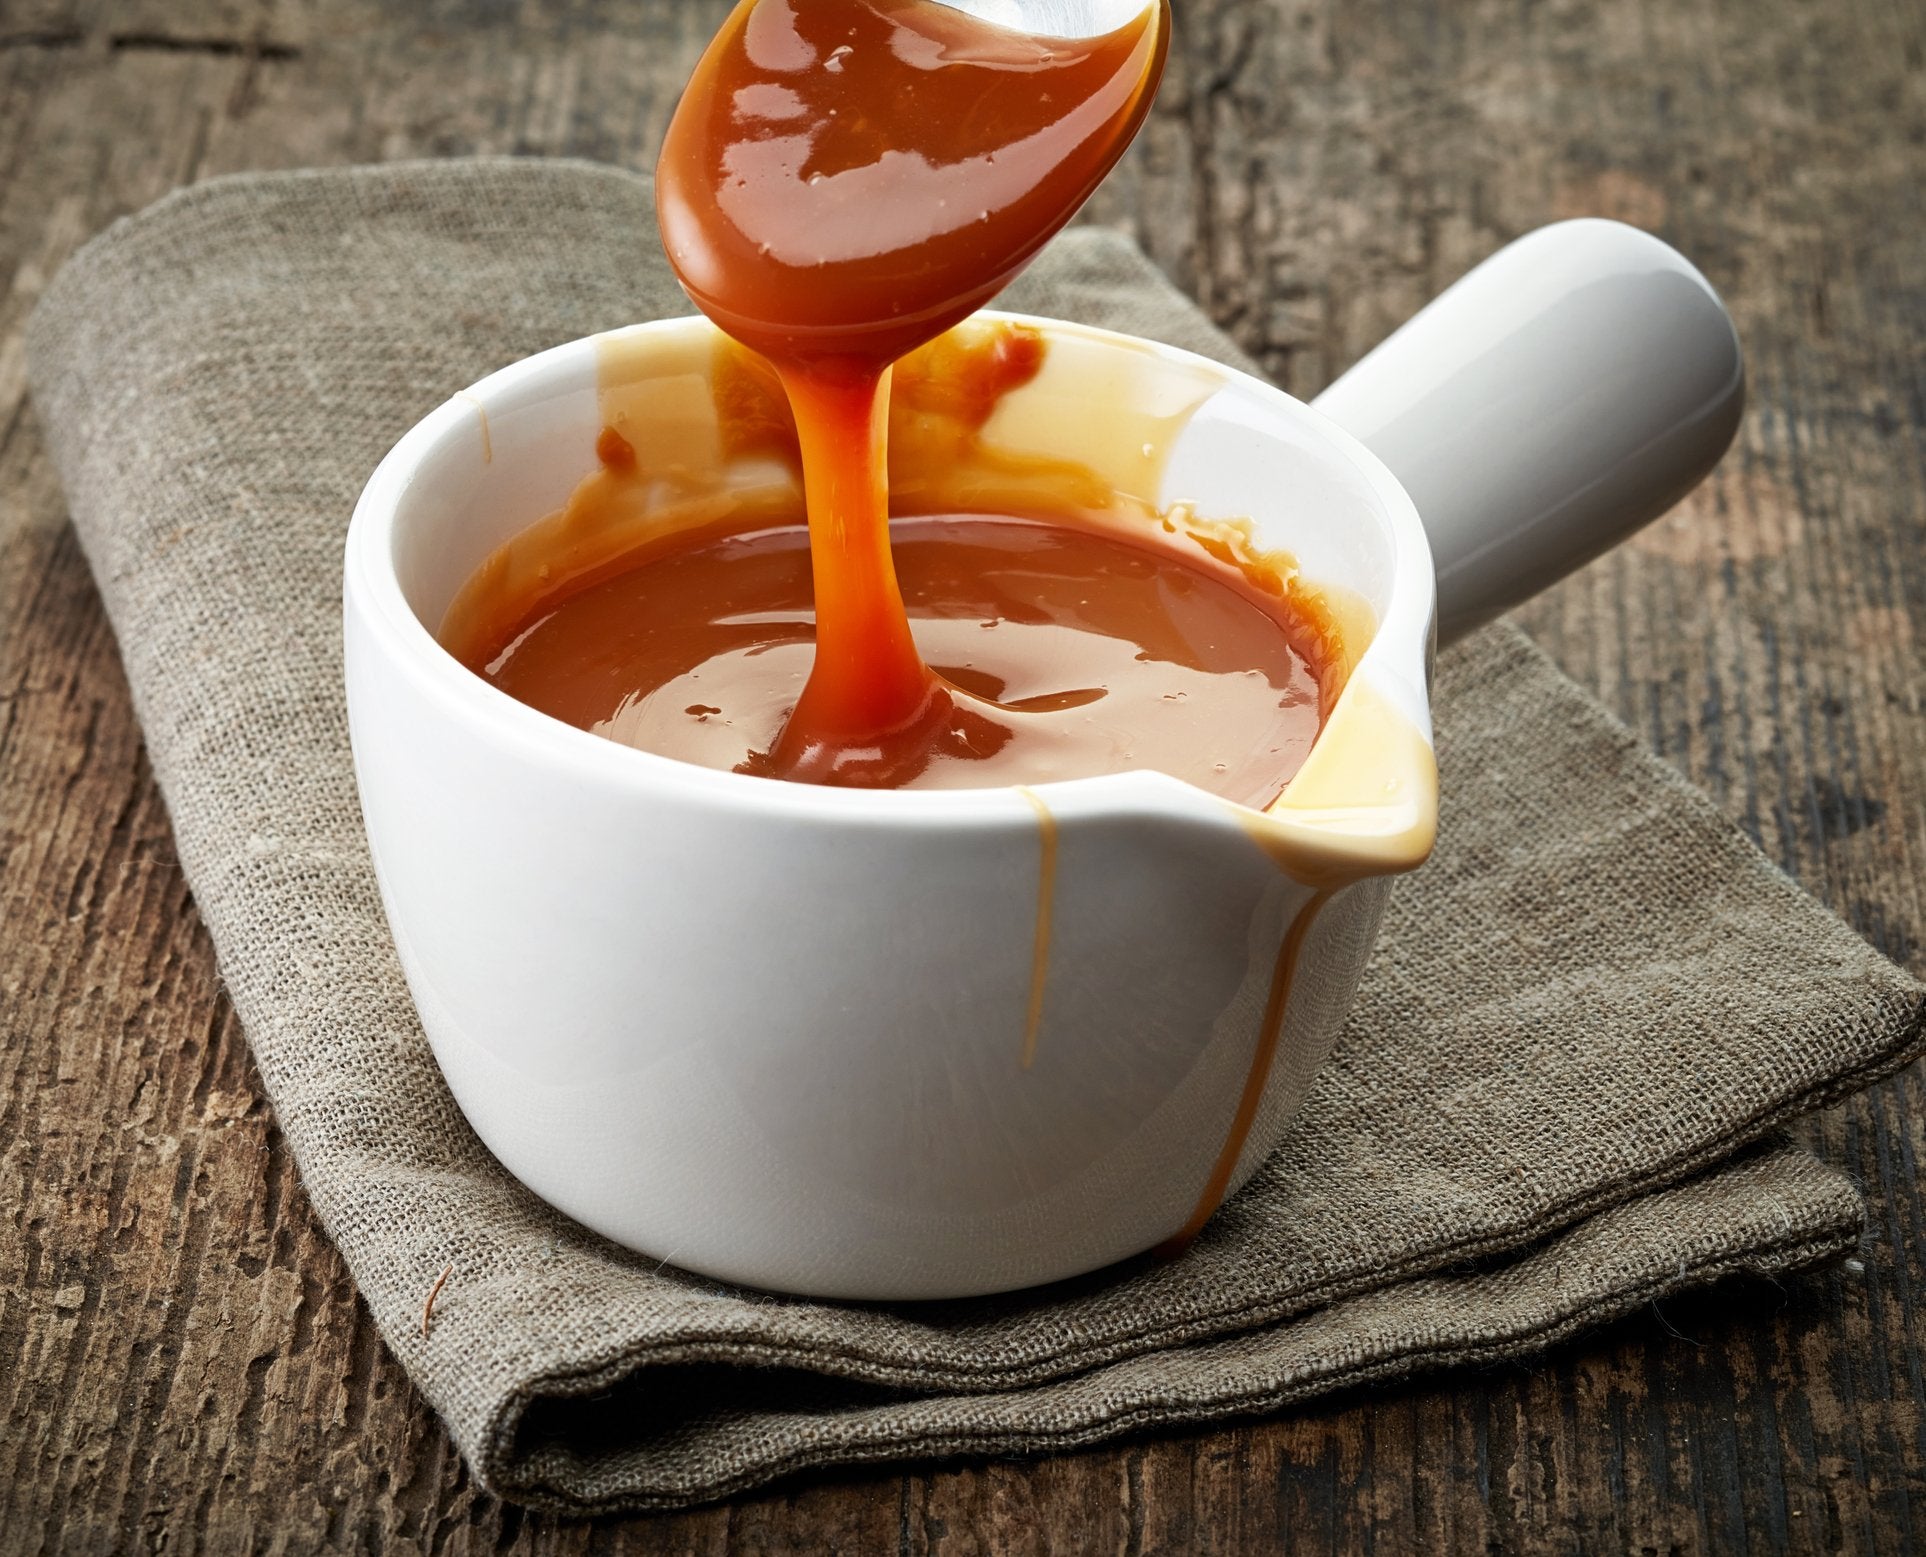 DELICIOUS CARAMEL SAUCE with a CITRIC ACID ZIP - Cape Crystal Brands